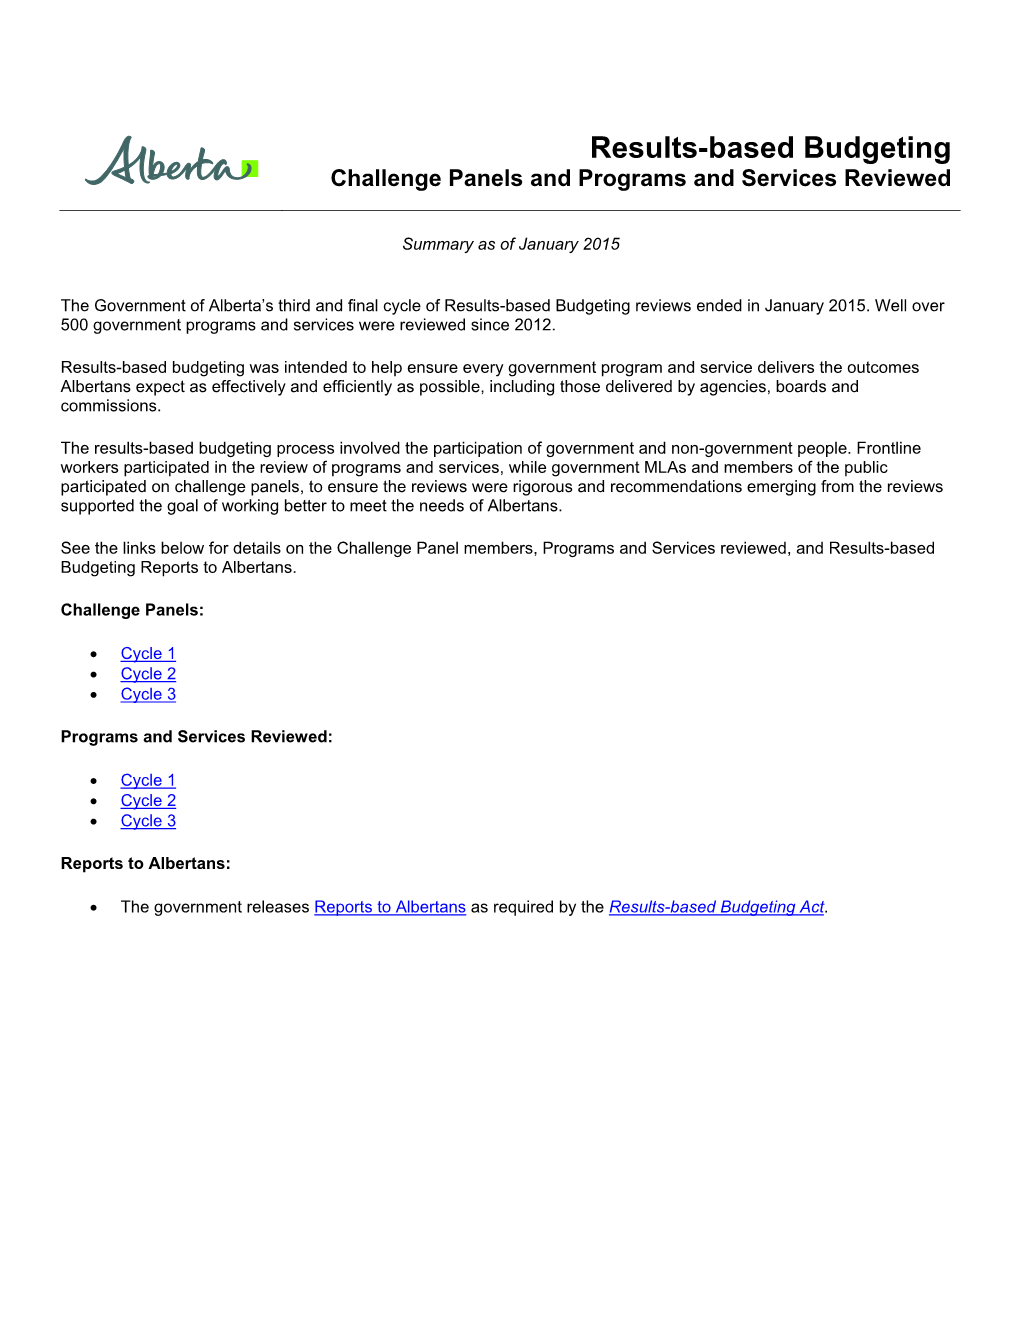 Results-Based Budgeting Challenge Panels and Programs and Services Reviewed